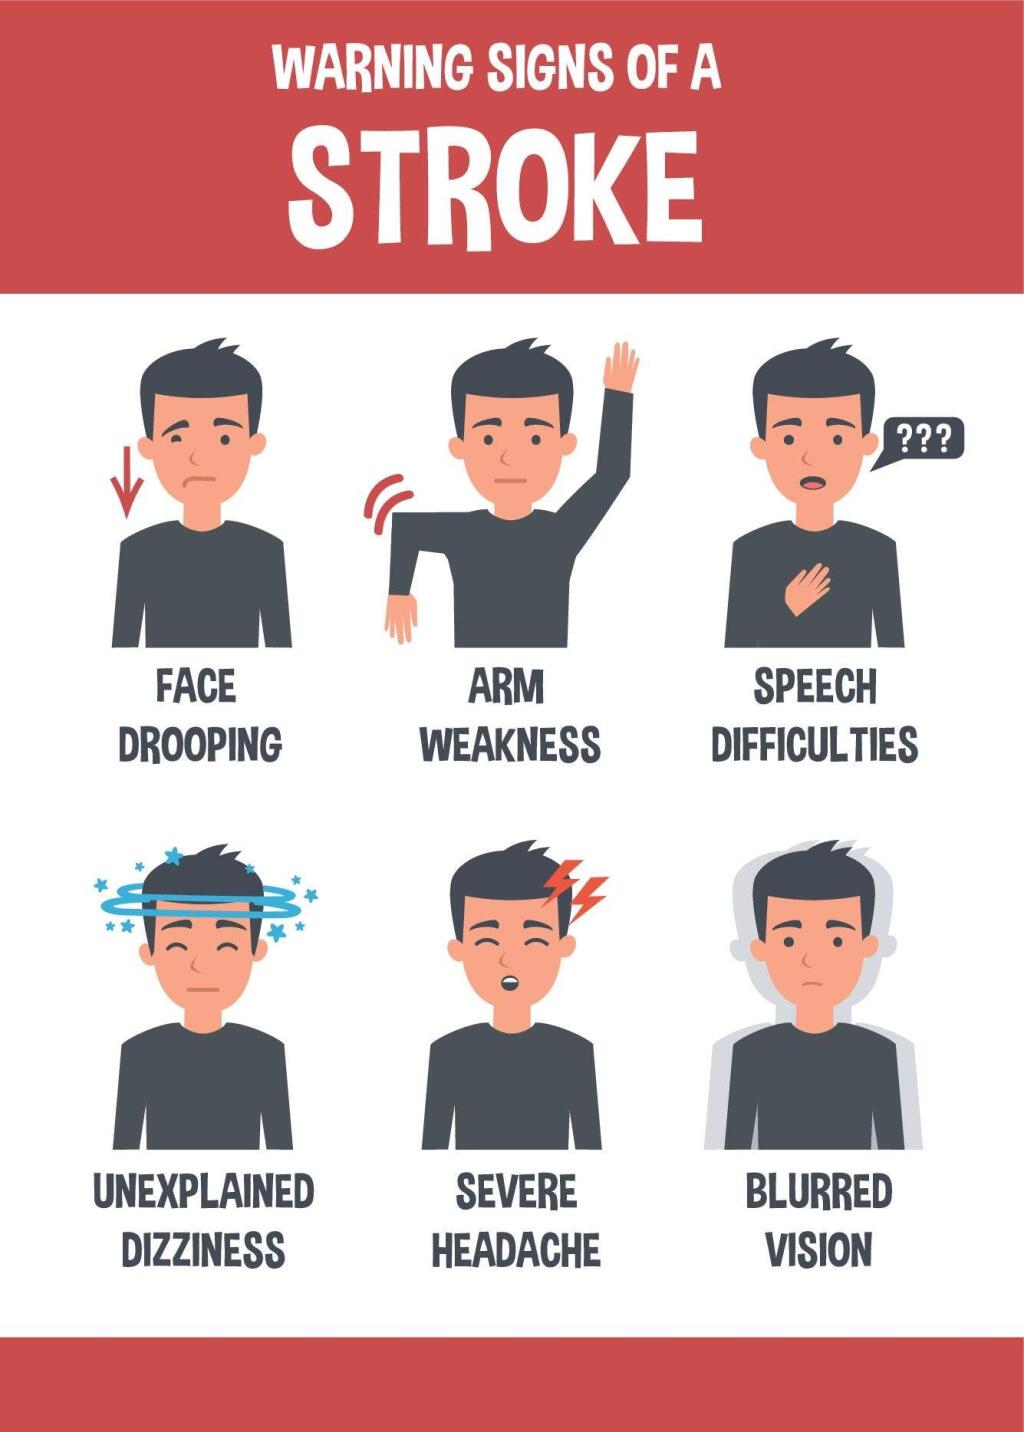 Warning signs of a stroke.